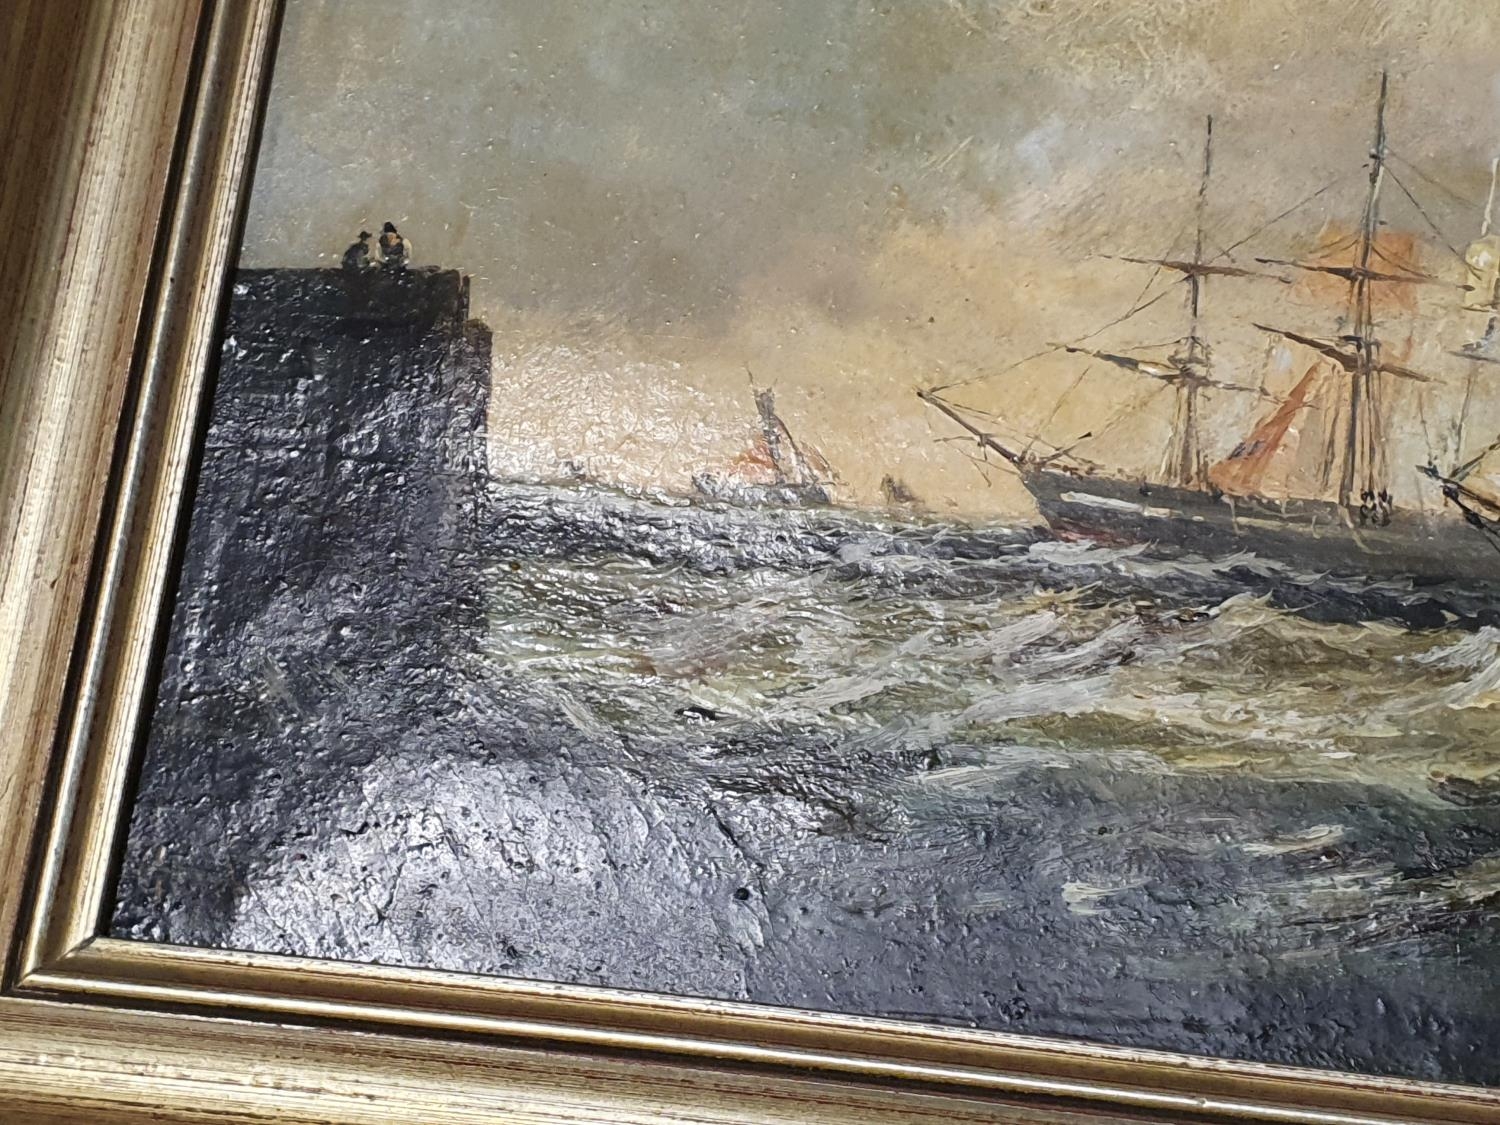 Framed and signed oil on canvas painting of ships on rough seas 41.5x57cm - Image 2 of 5